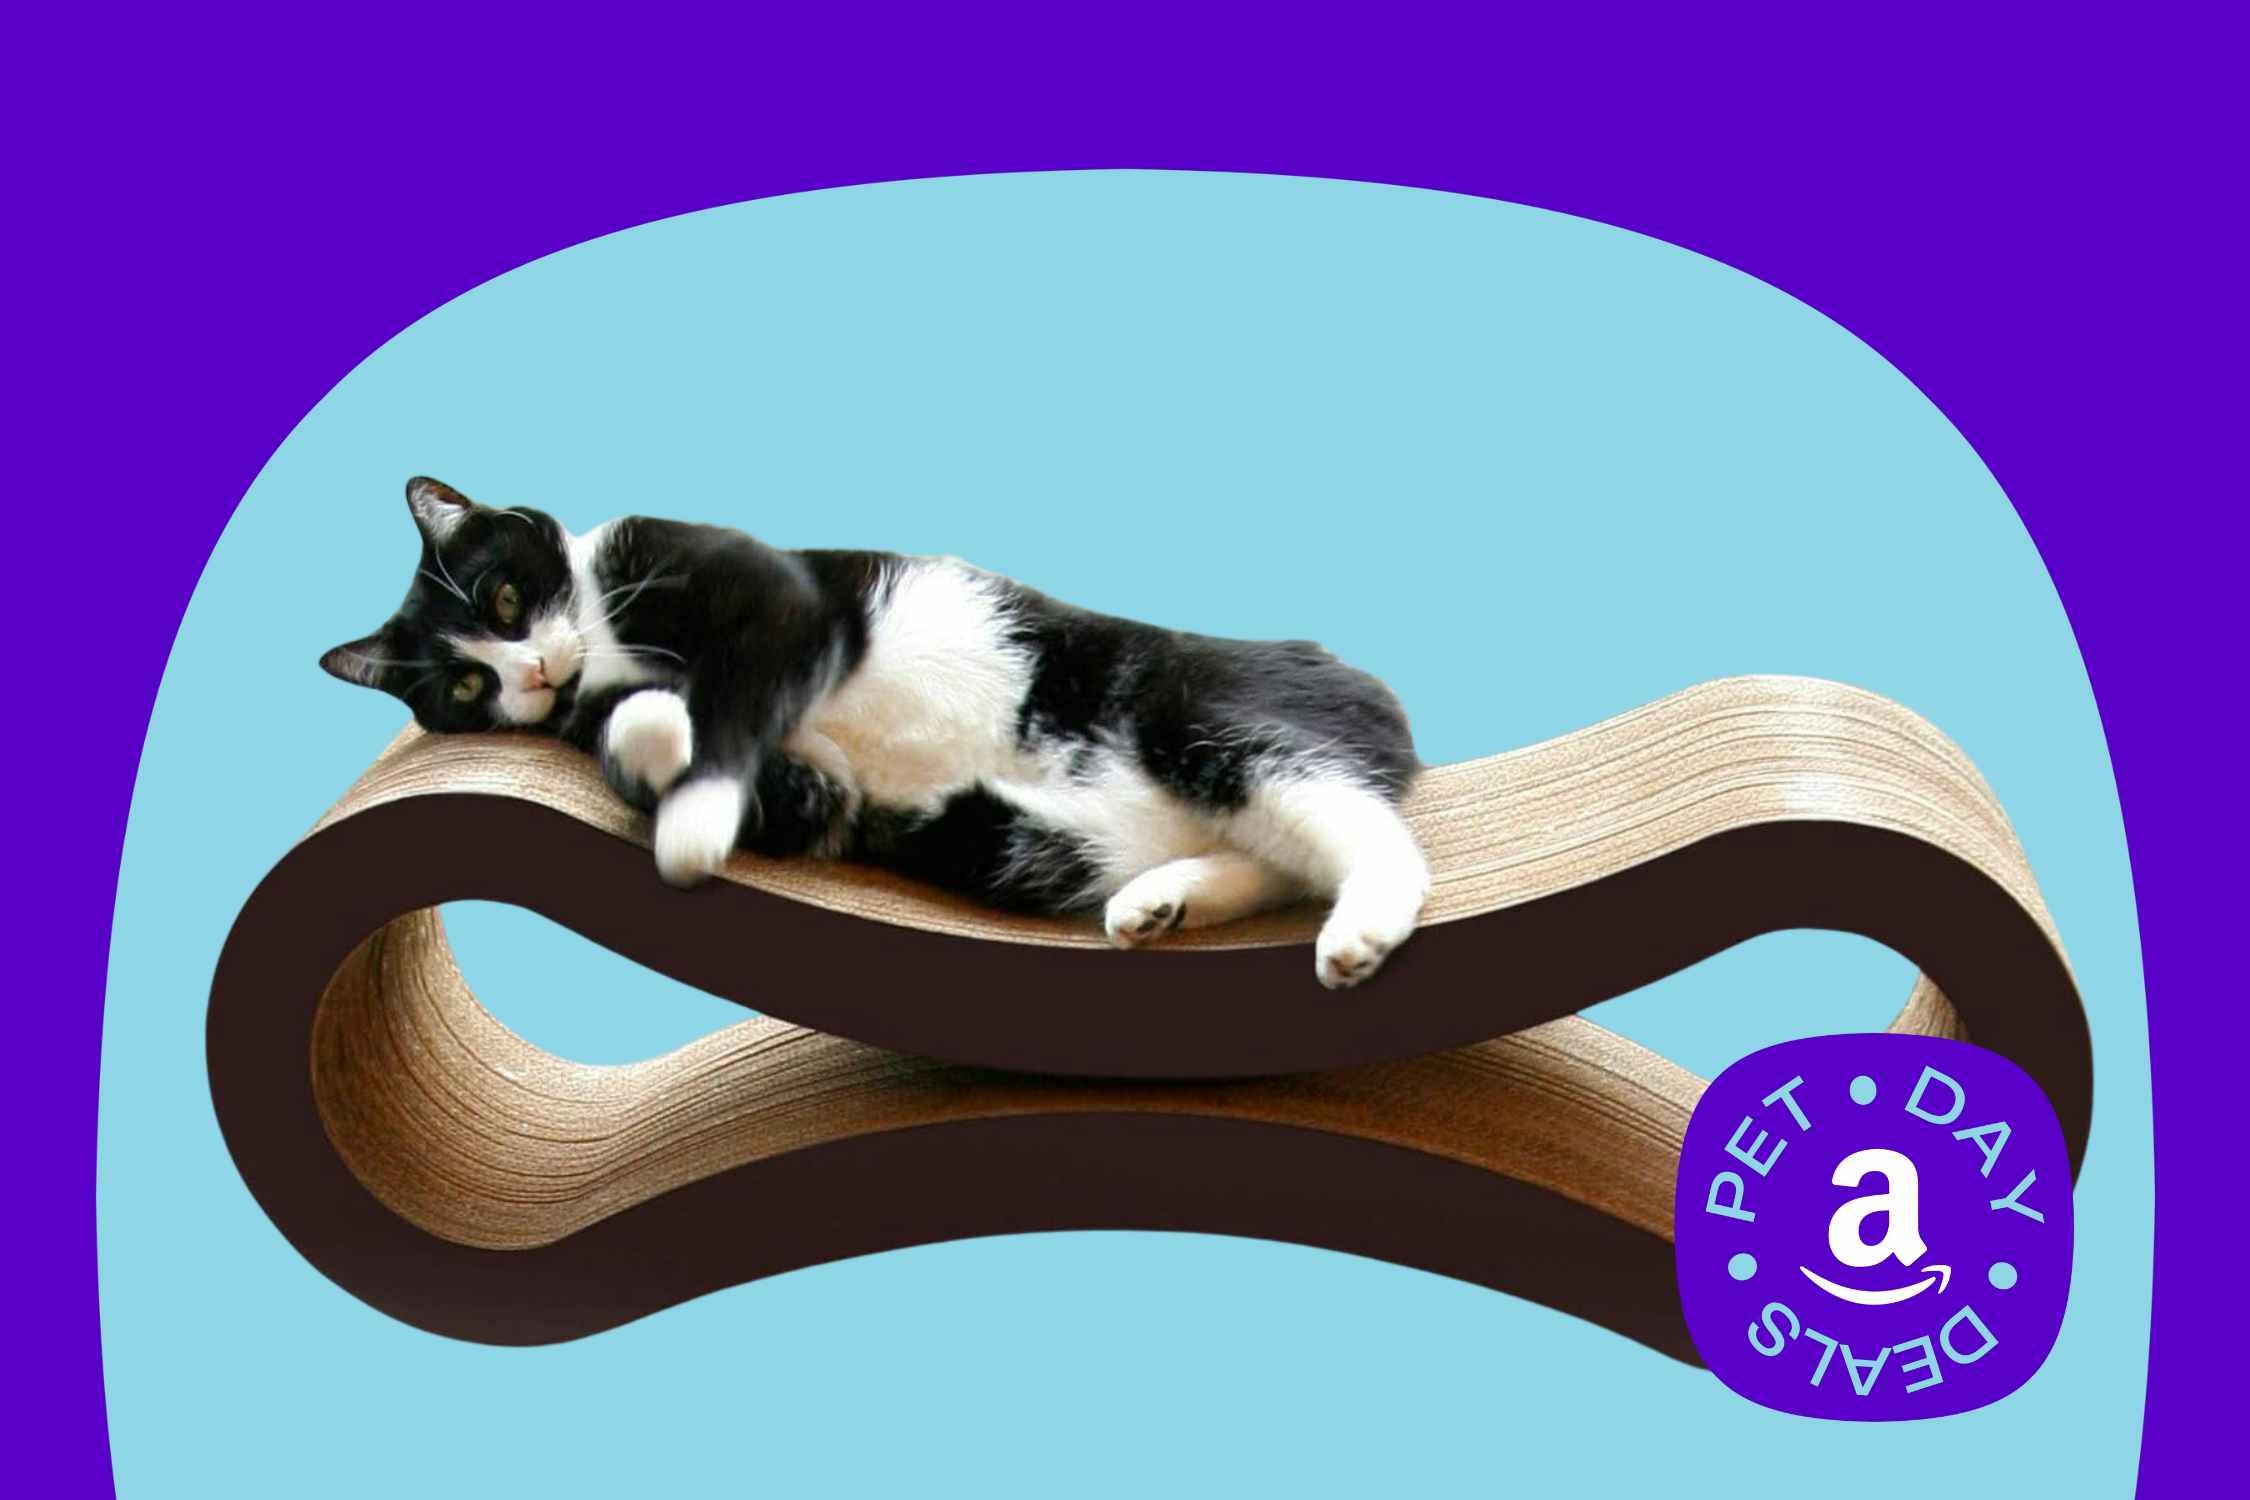 Cat Scratcher Lounge With 27K Reviews, Only $36 on Amazon (Reg. $55)